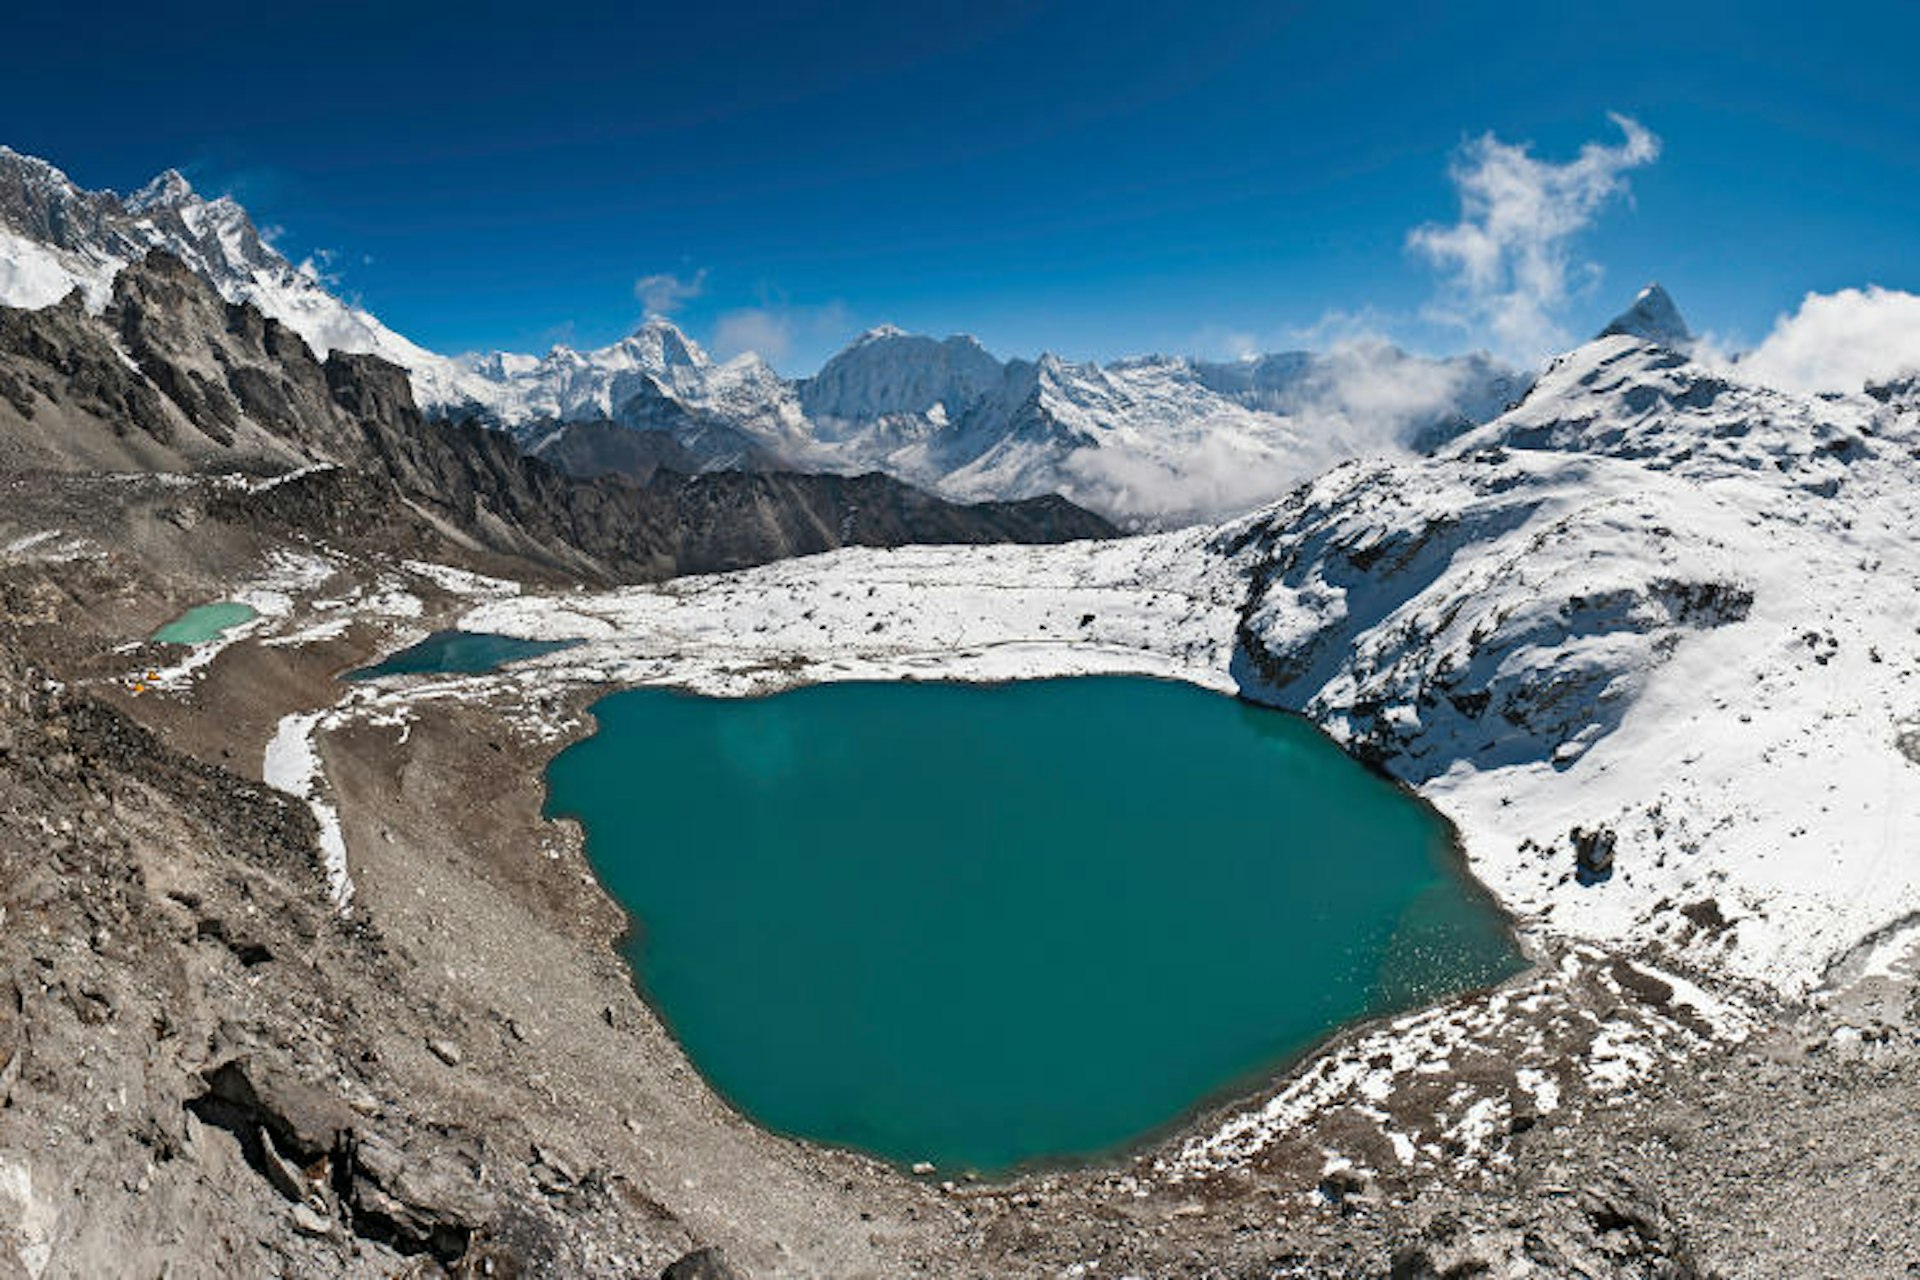 Mountain lake framed by snow at Kongma La. Image by fotoVoyager / Getty Images.